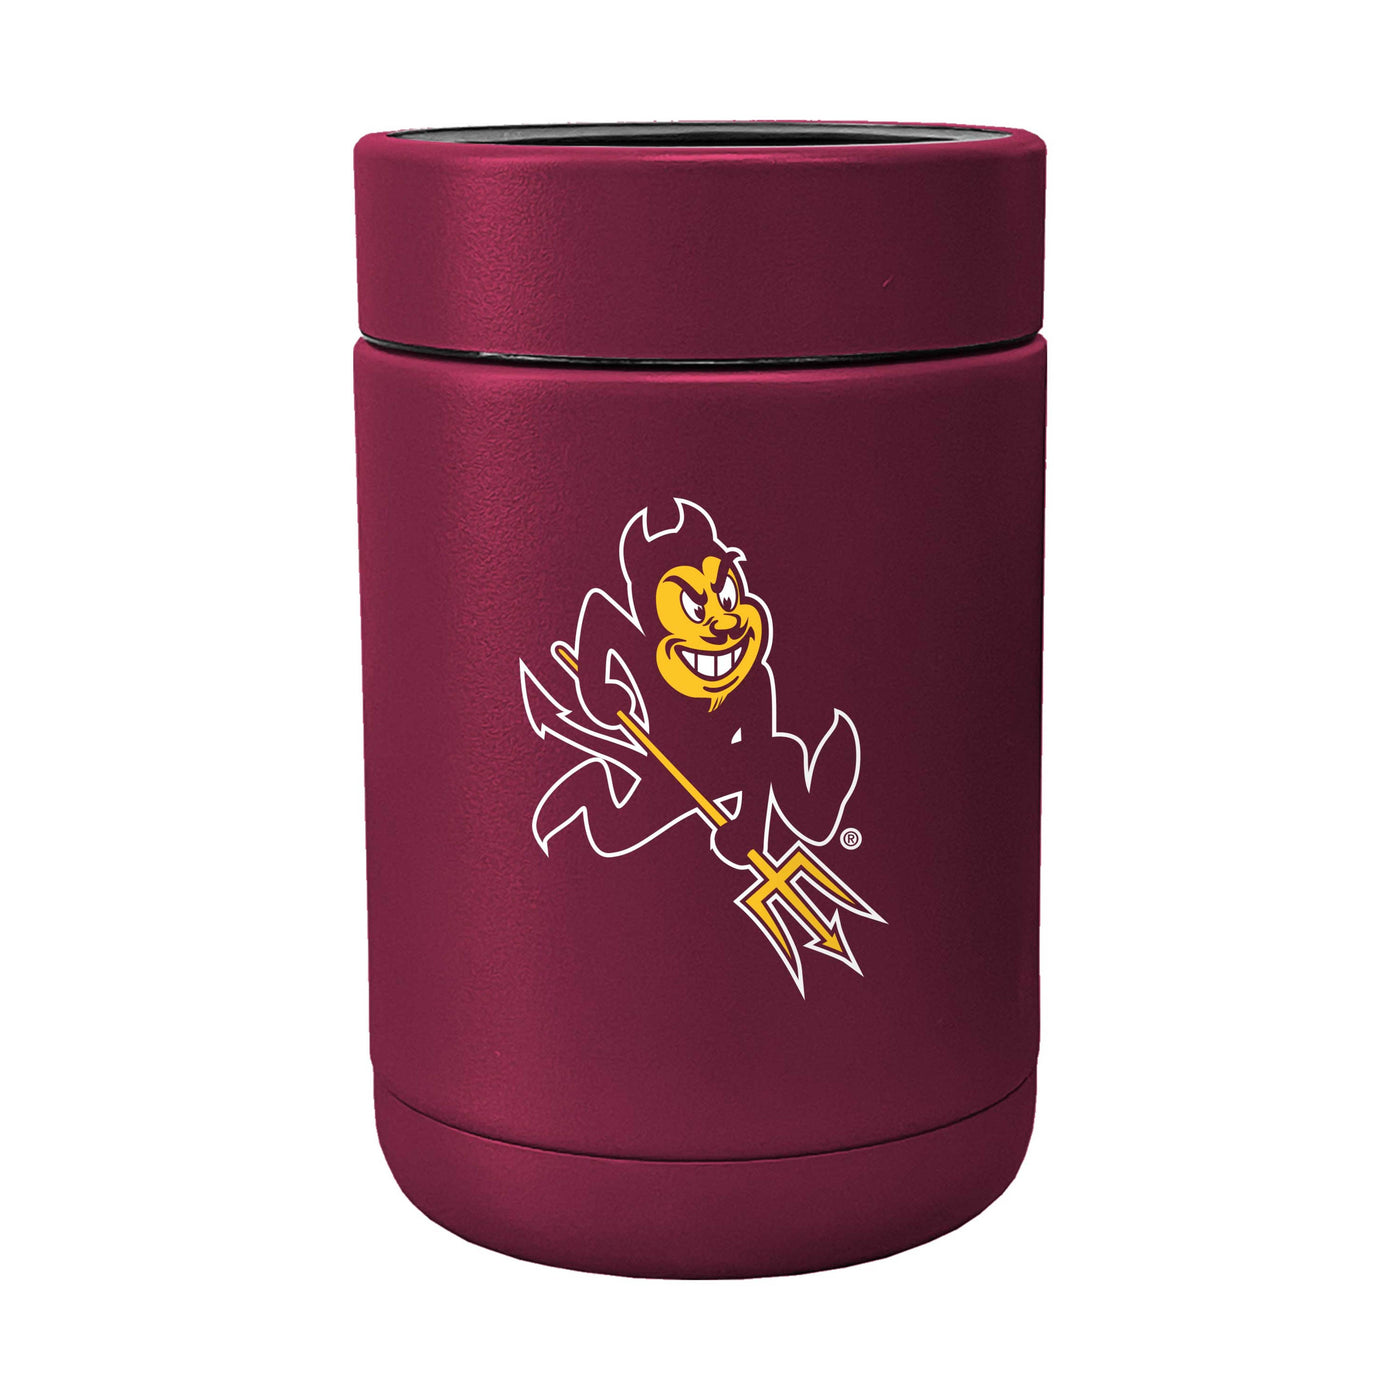 ASU short maroon can coolie with the mascot 